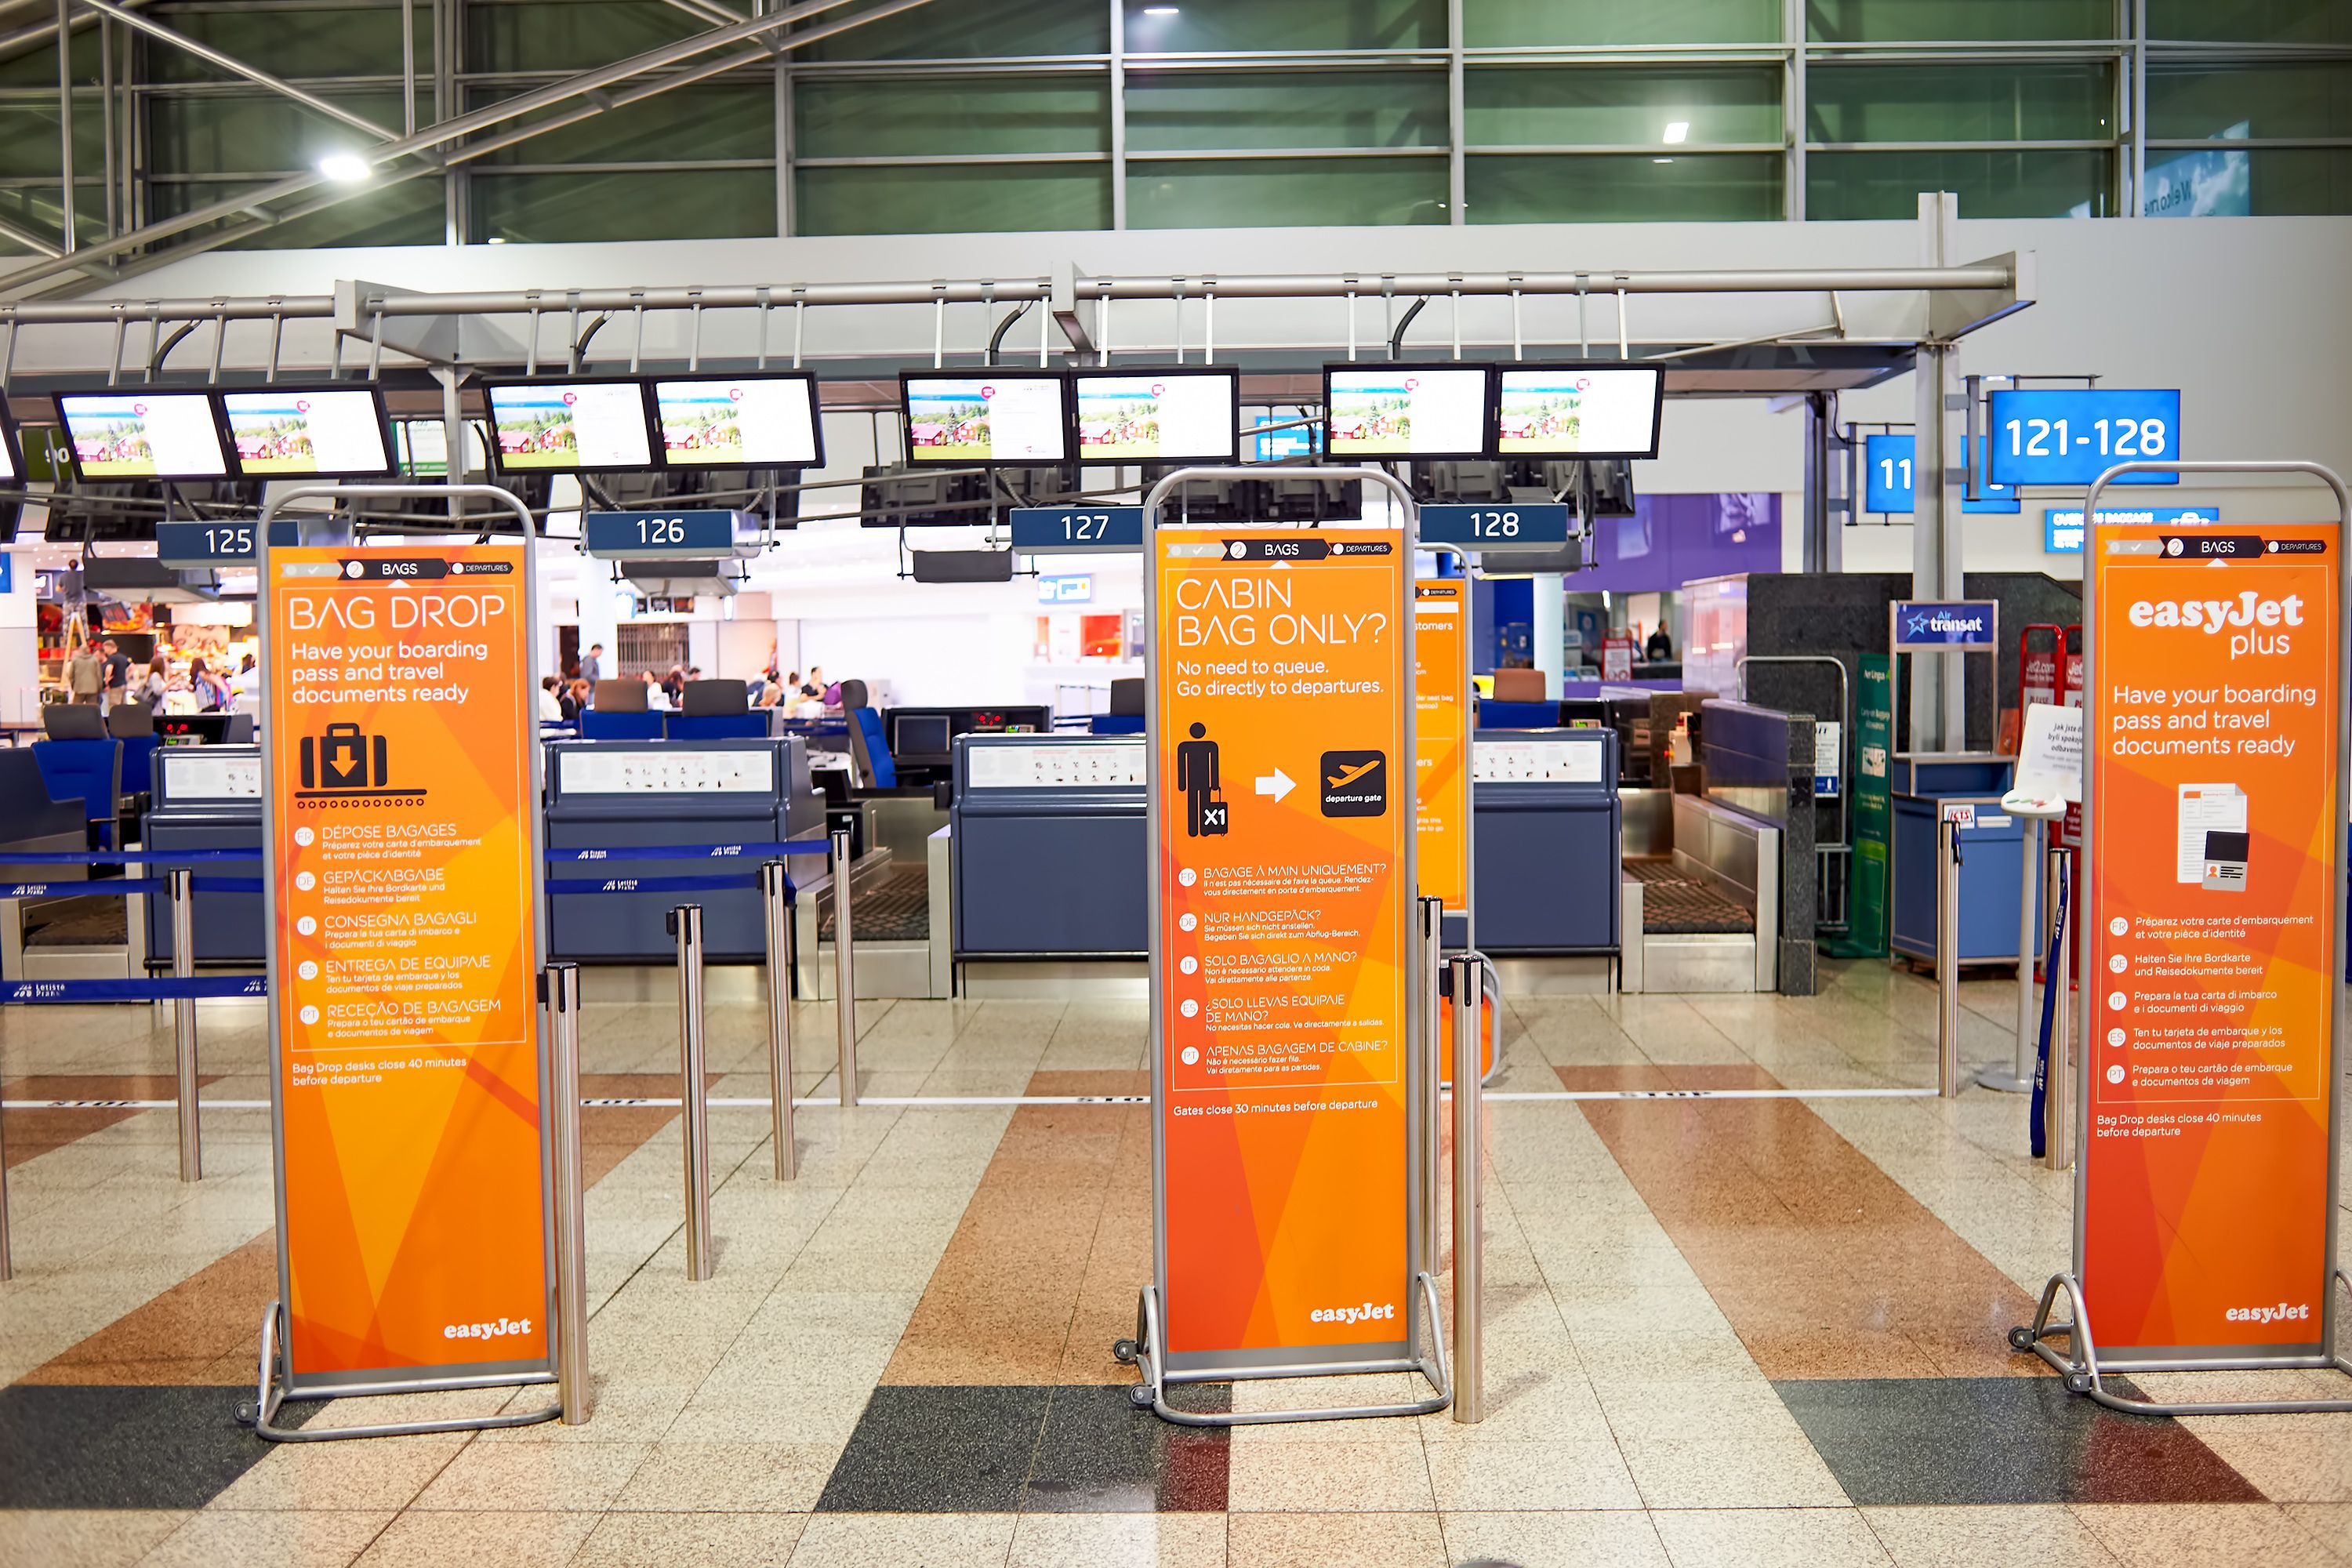 An easyJet check in area of an airport.